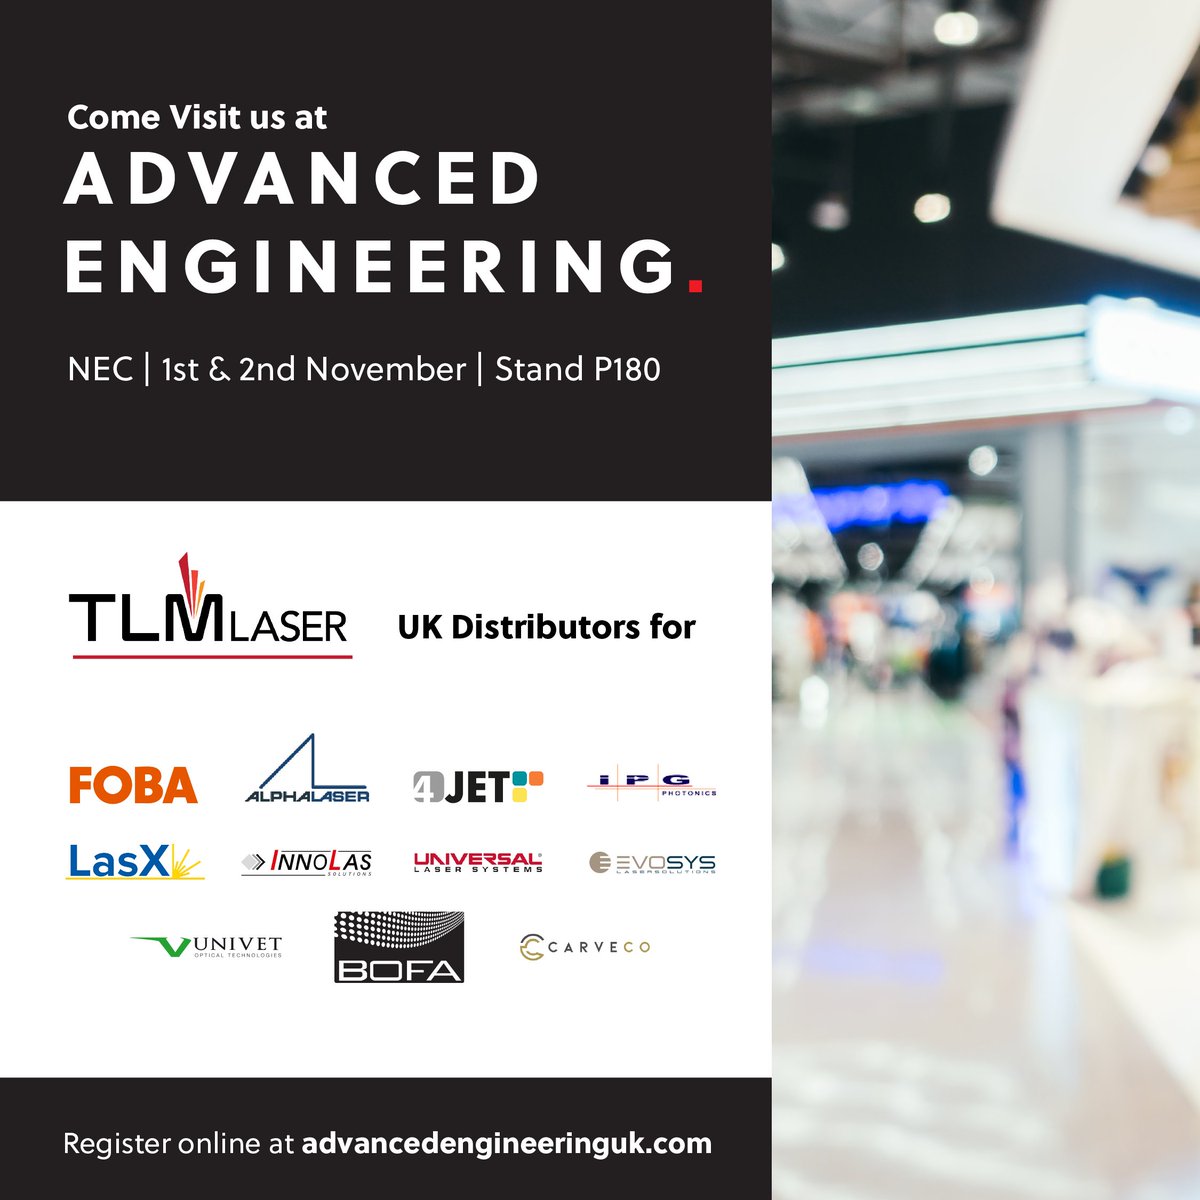 👋 Join us at Advanced Engineering on Nov 1st & 2nd

Come visit our stand and have a chat to see how our specialist machines are helping boost productivity for businesses just like yours. ⚡️📈

#TLMLaser #AdvancedEngineering #LaserTechnology #EngineeringSolutions